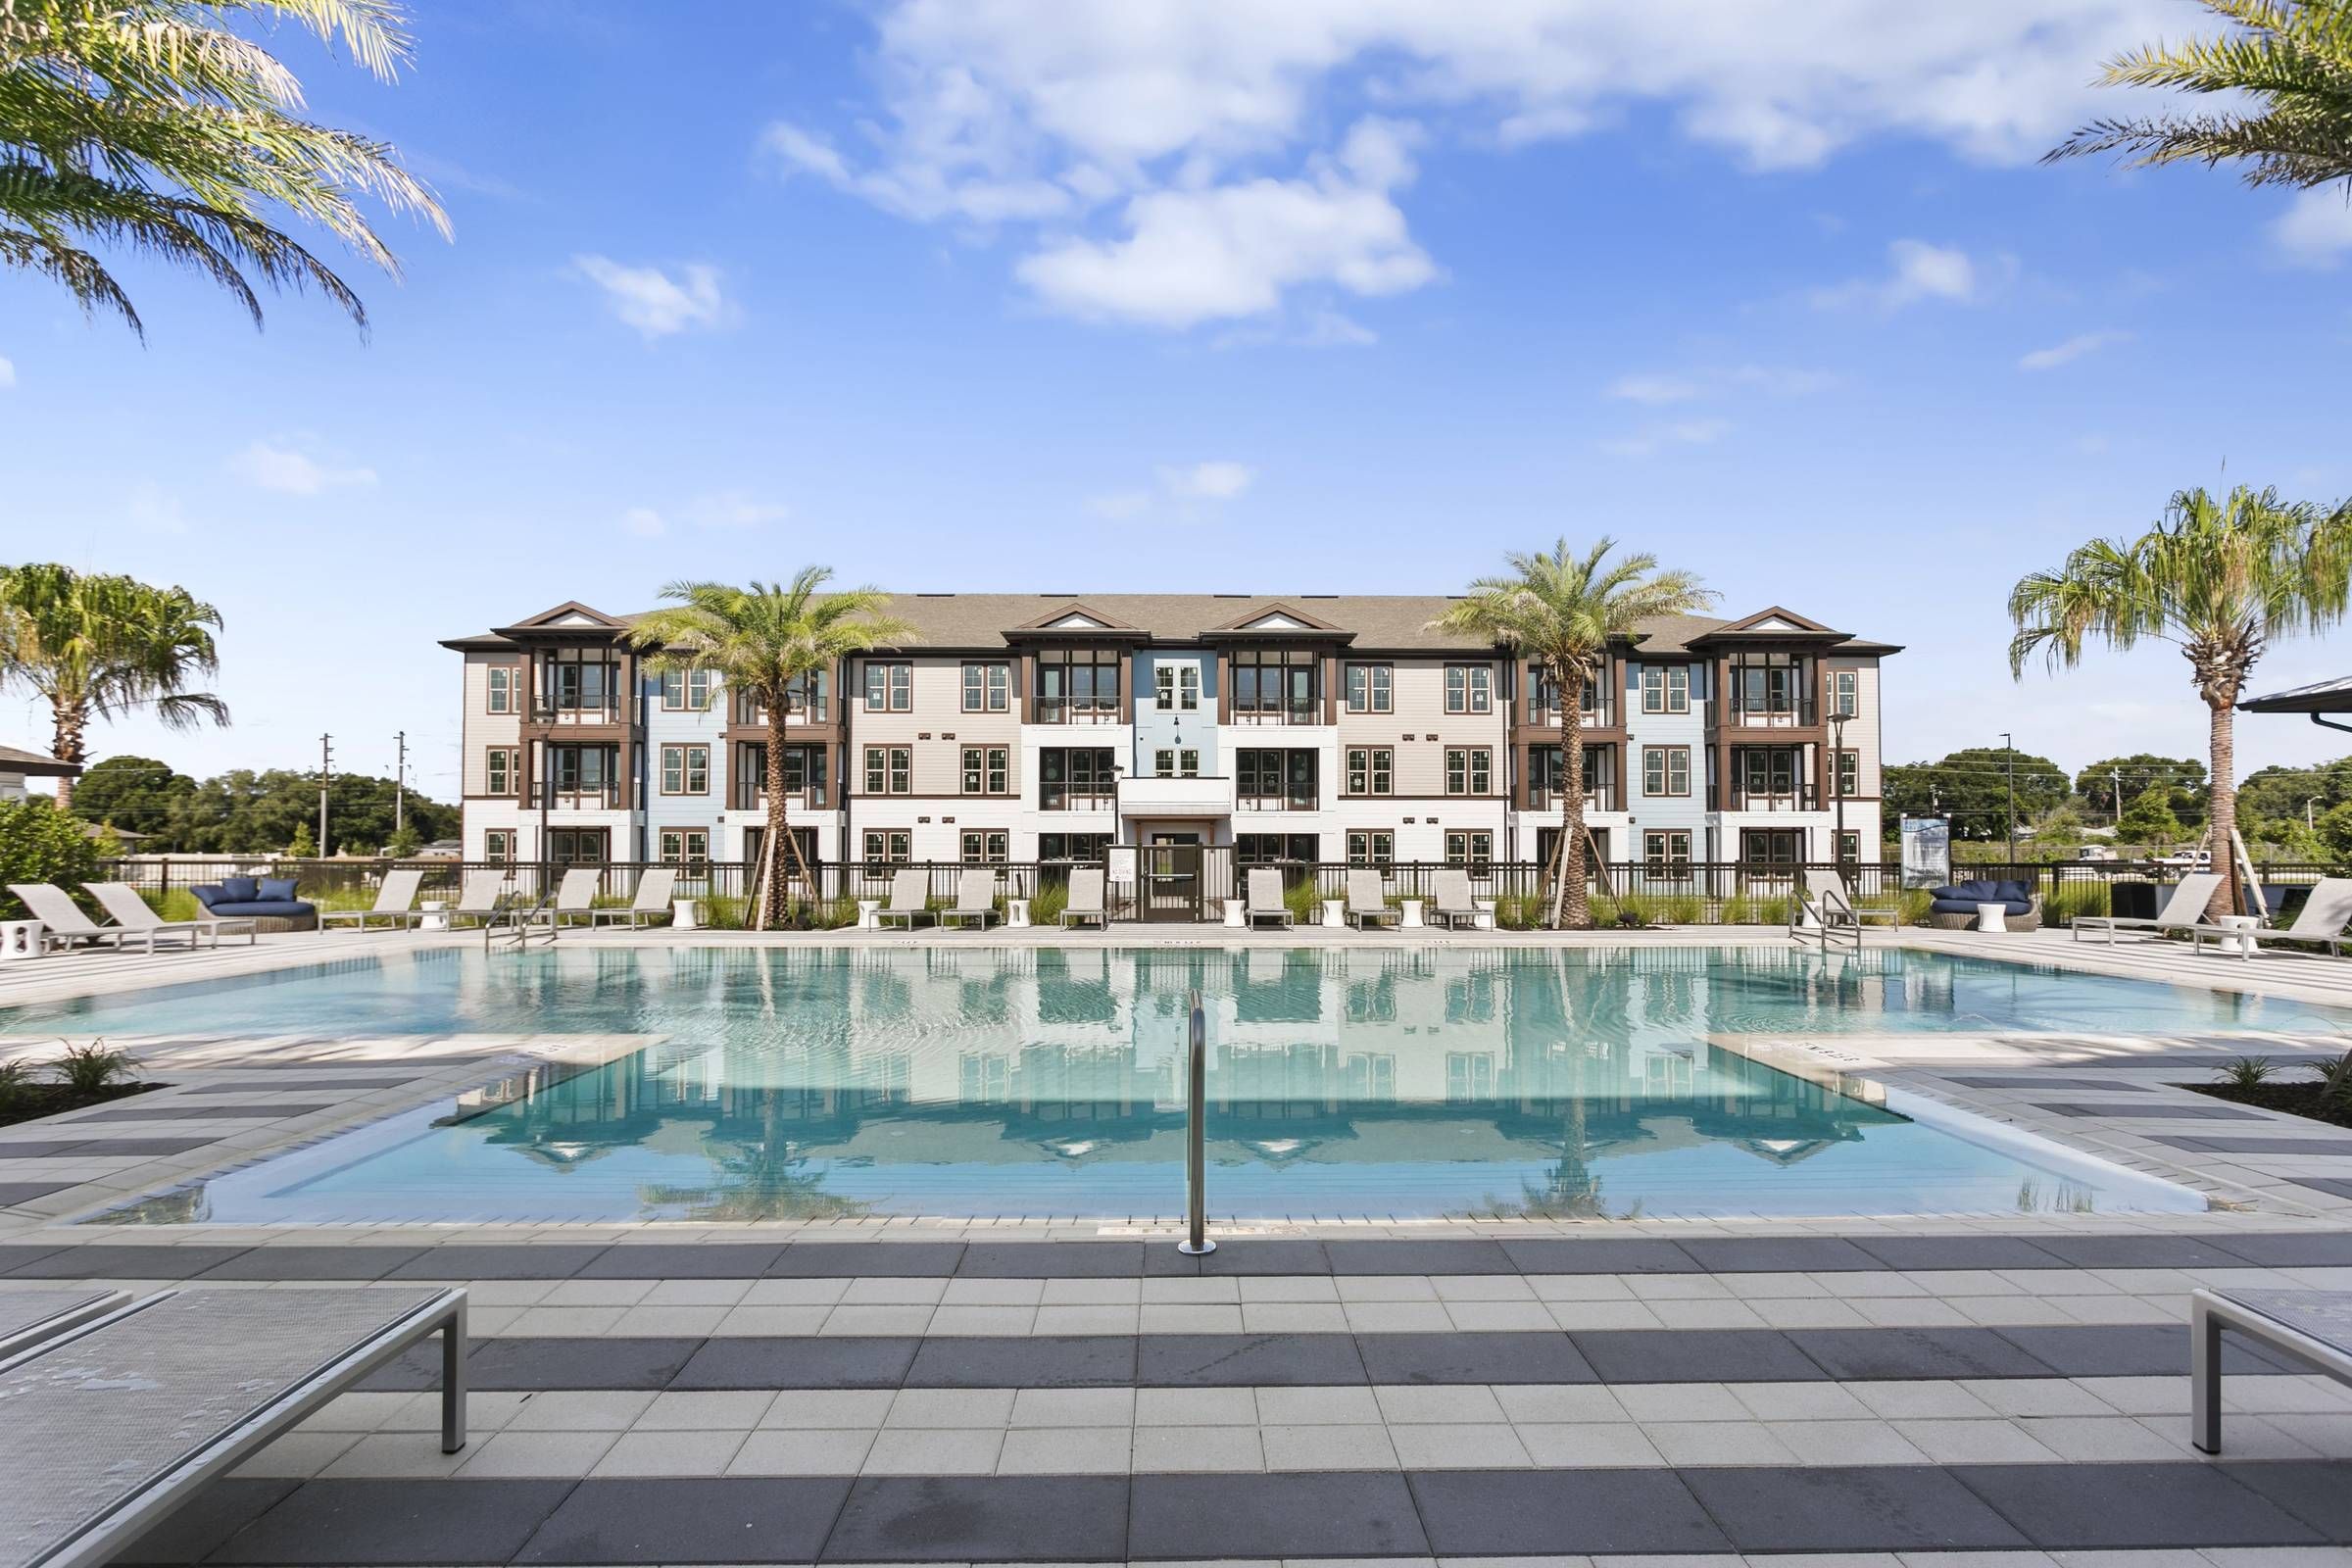 A tranquil outdoor swimming pool at Alta Sugarloaf surrounded by lounging chairs, palm trees, and a view of the apartment complex under a clear sky.